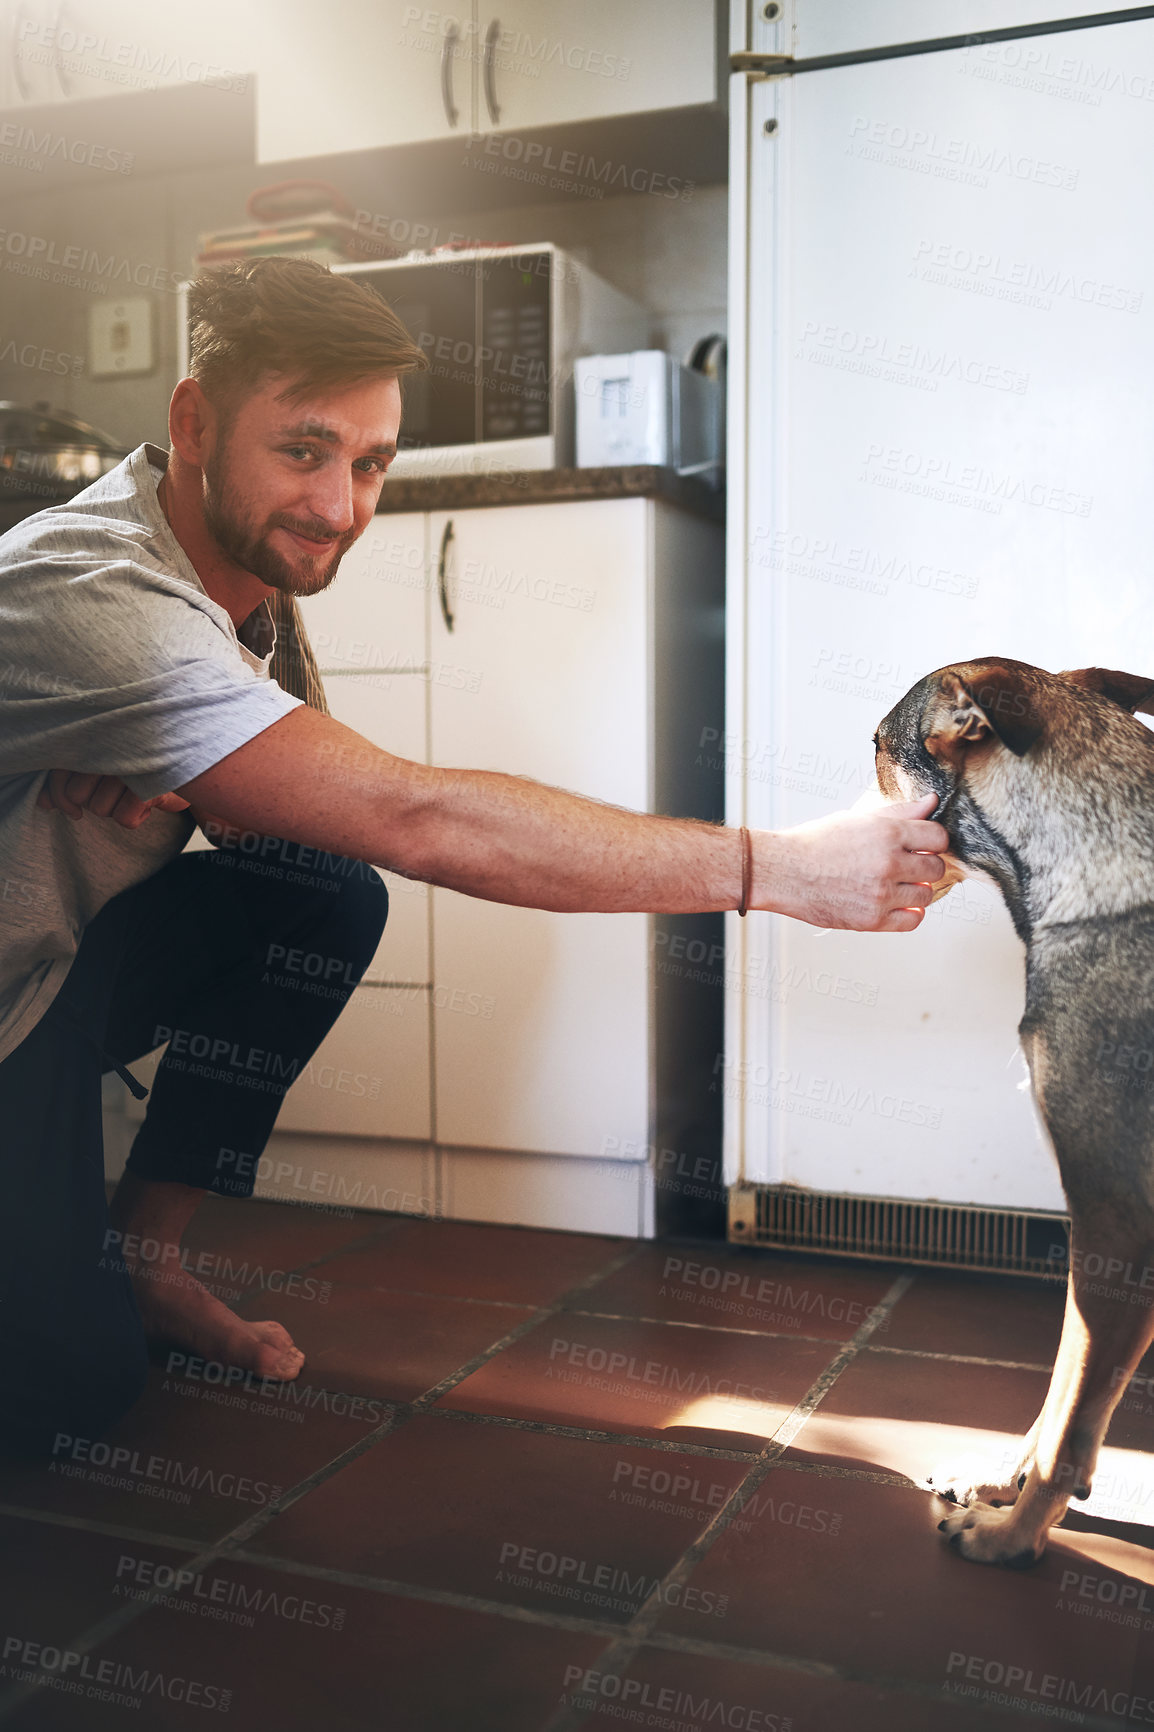 Buy stock photo Cropped shot of a cheerful young man shaking his adorable dog's paw inside of the kitchen during the day